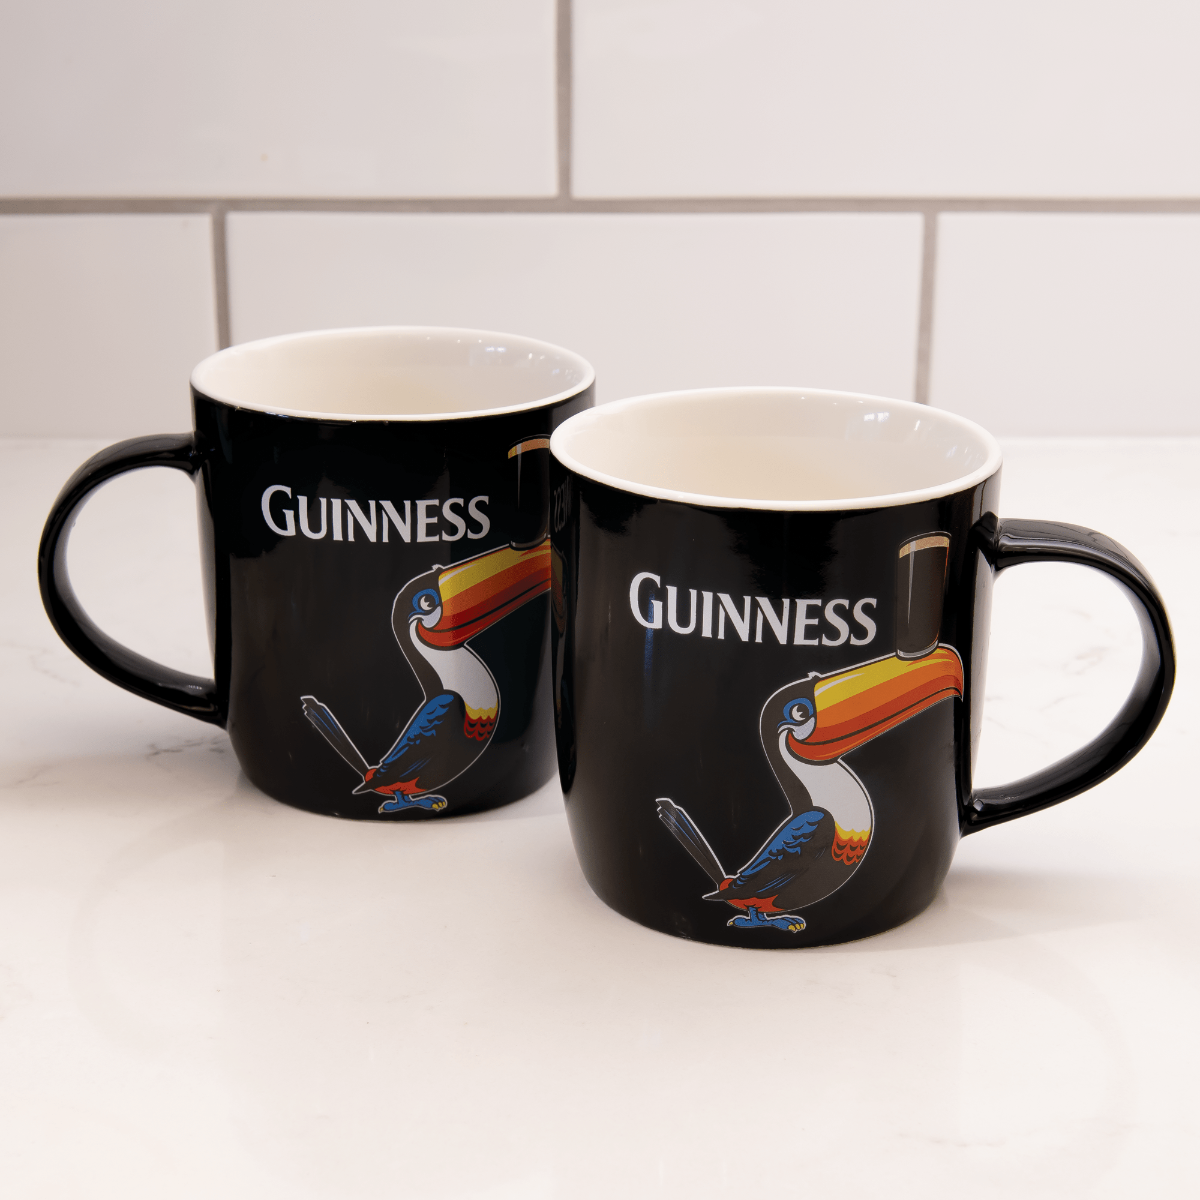 A Guinness Toucan Mug Set featuring two mugs adorned with a toucan design.